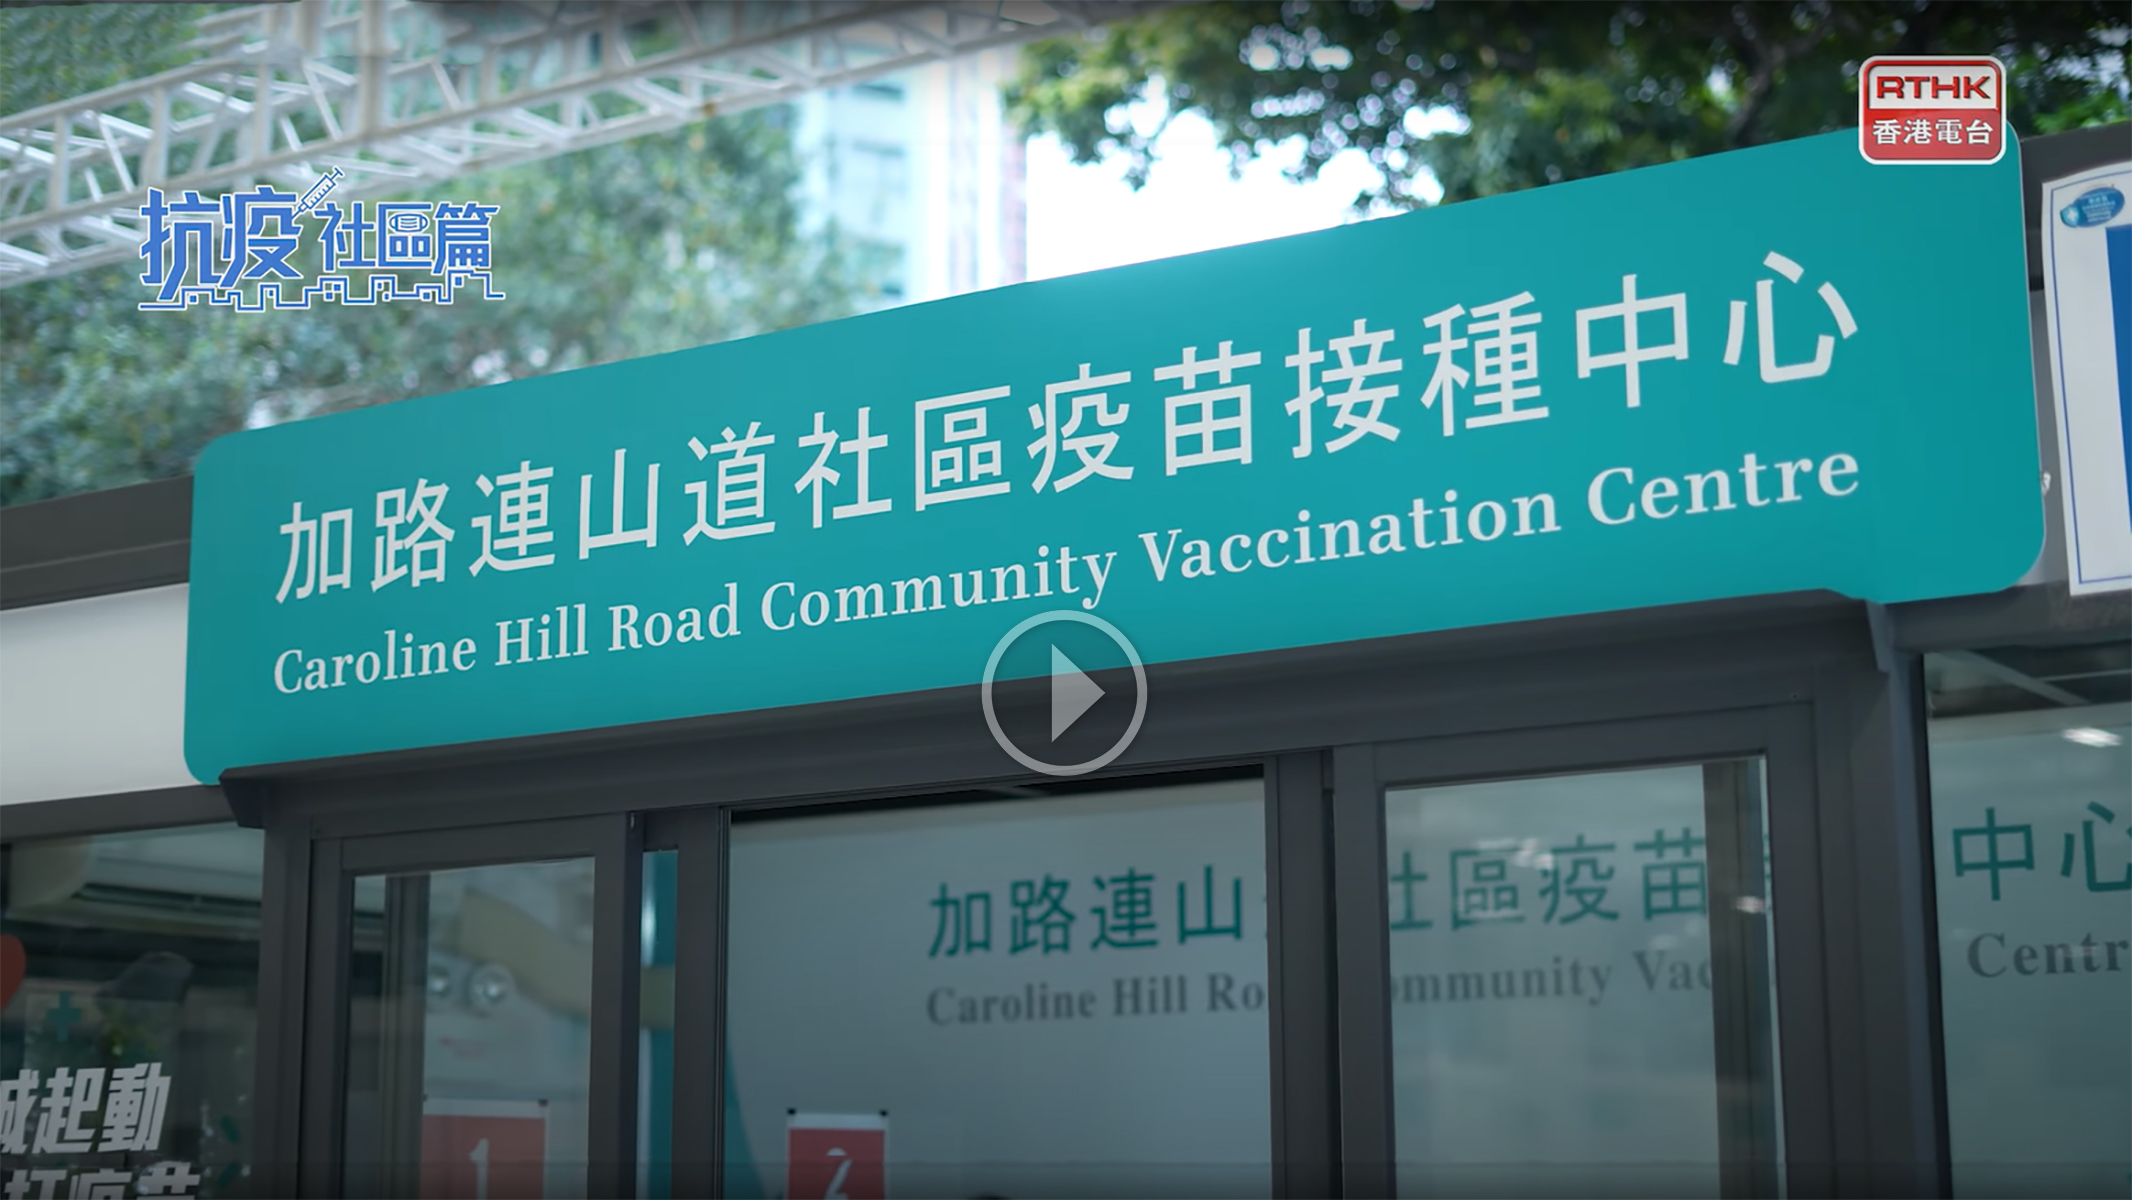 TV promo of the PolyU-operated community vaccination centre